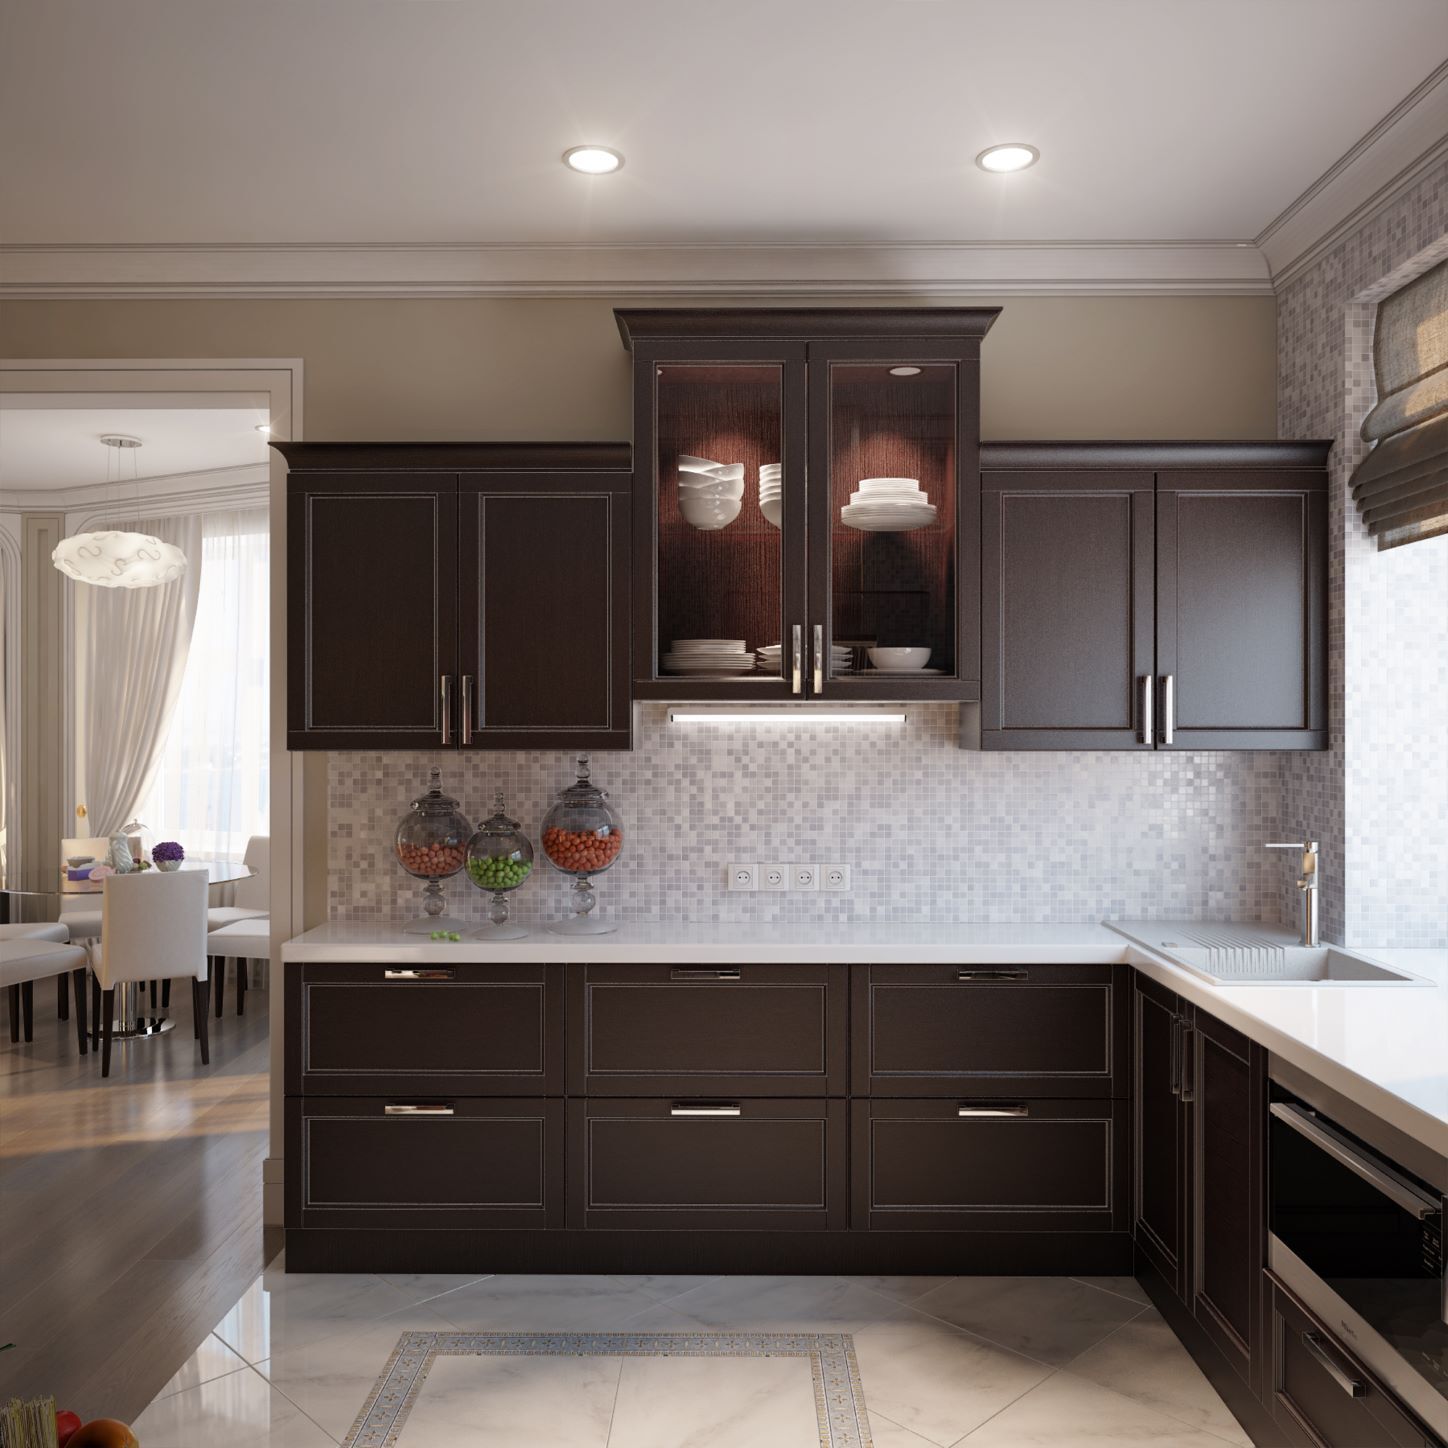 3 Complimentary Paint Ideas For Dark Kitchen Cabinets First Place Painting